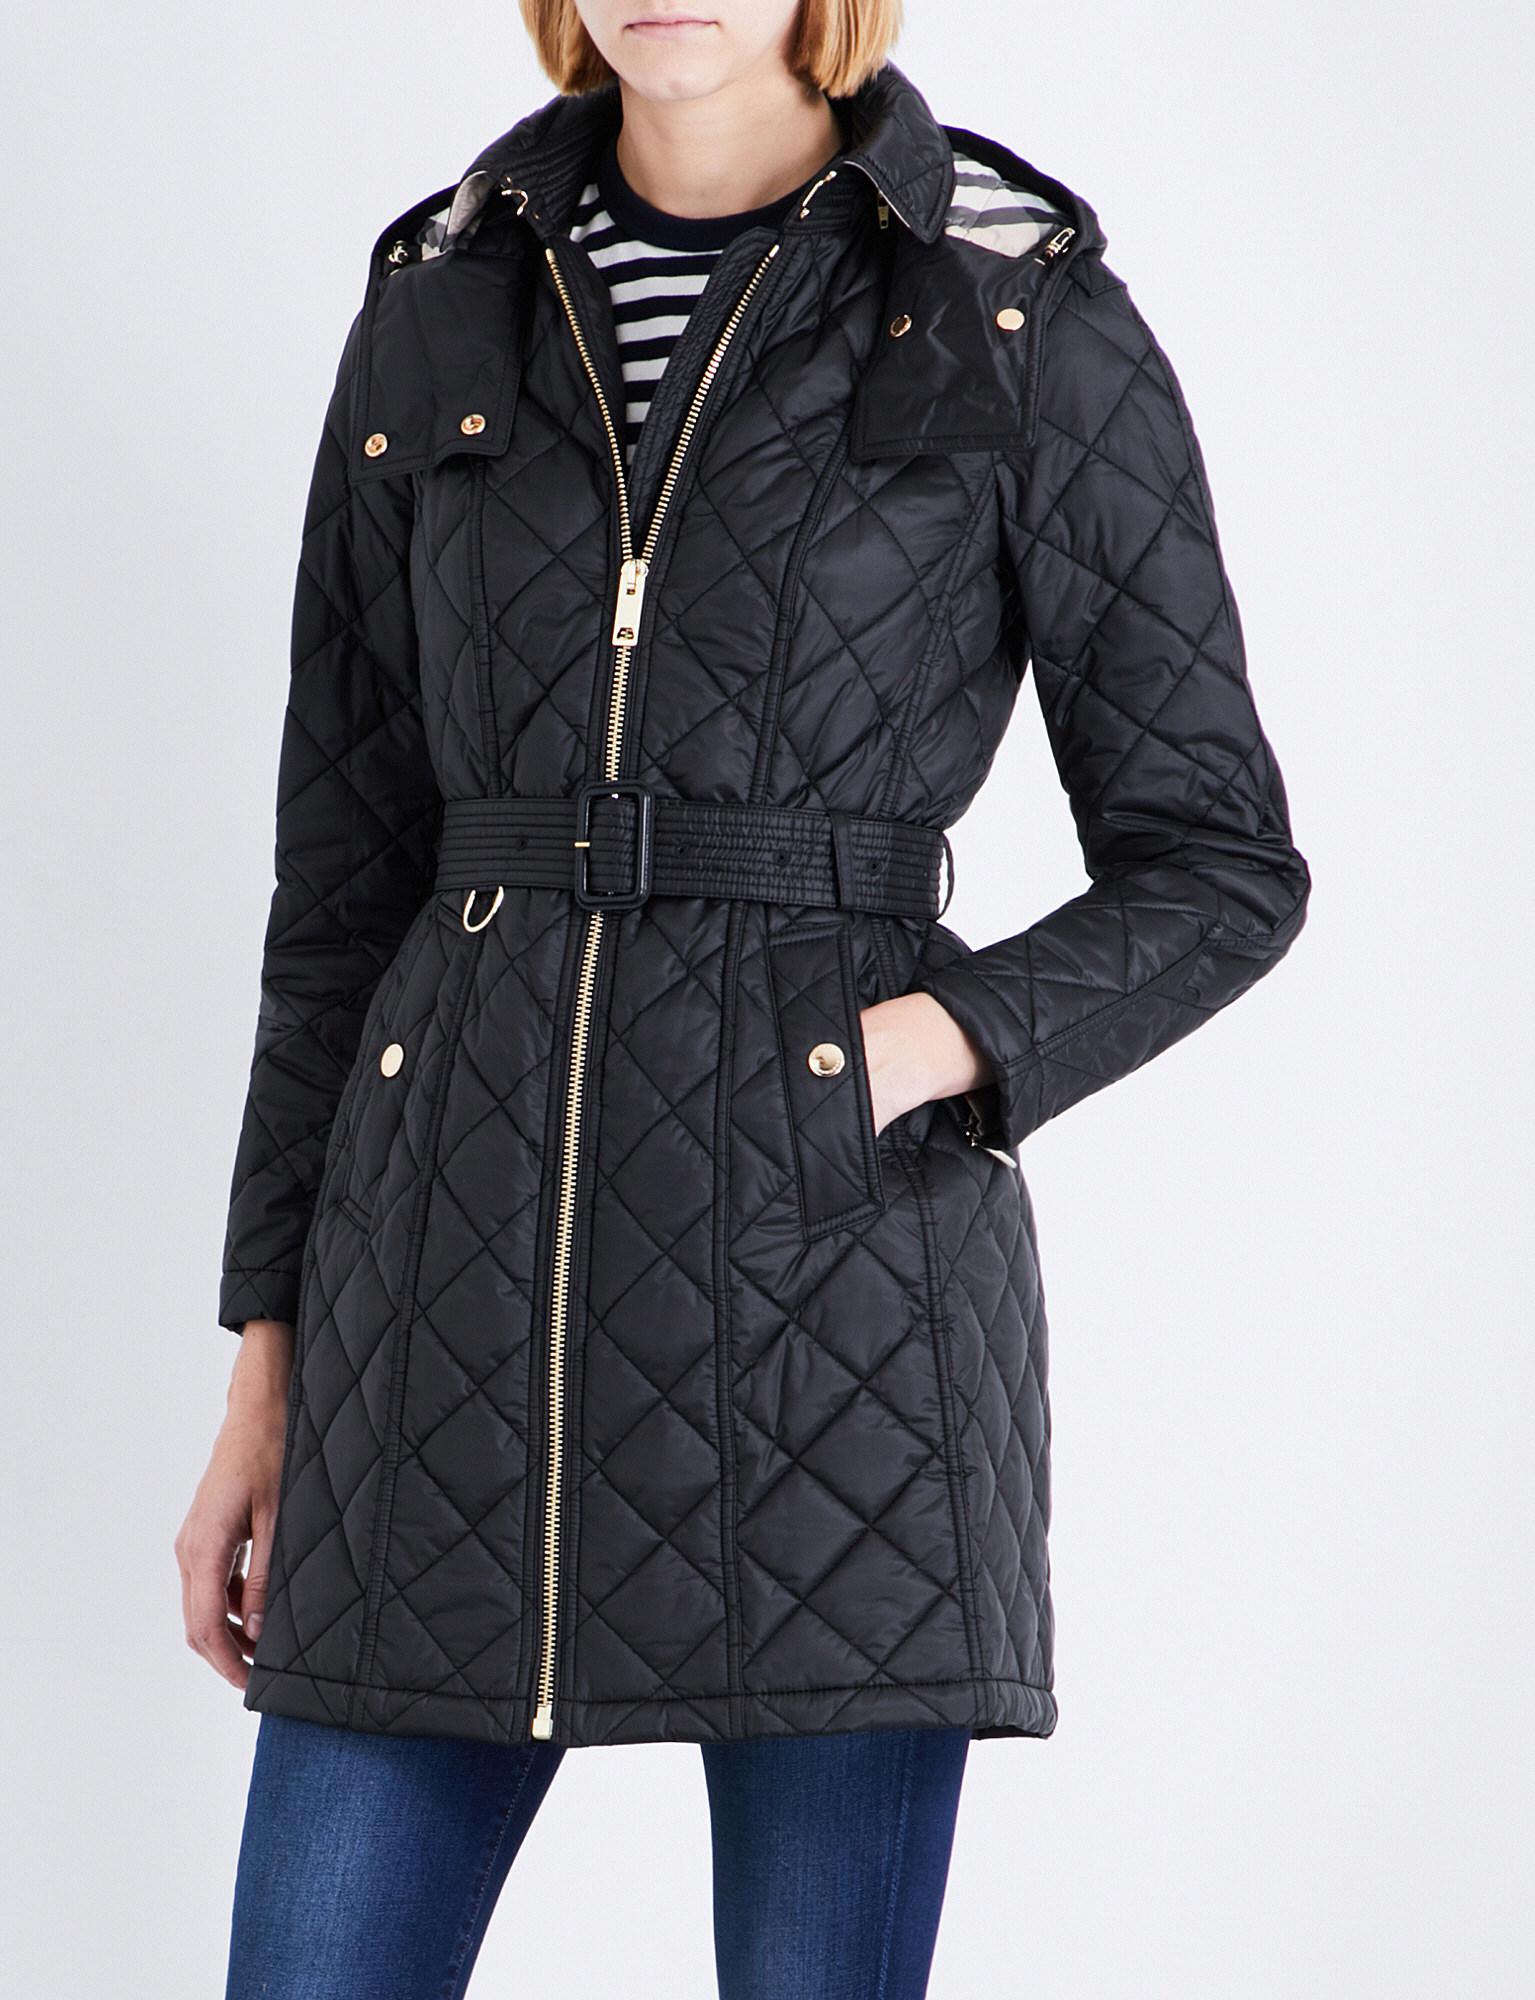 Burberry Diamond-quilted Coat in Black - Lyst